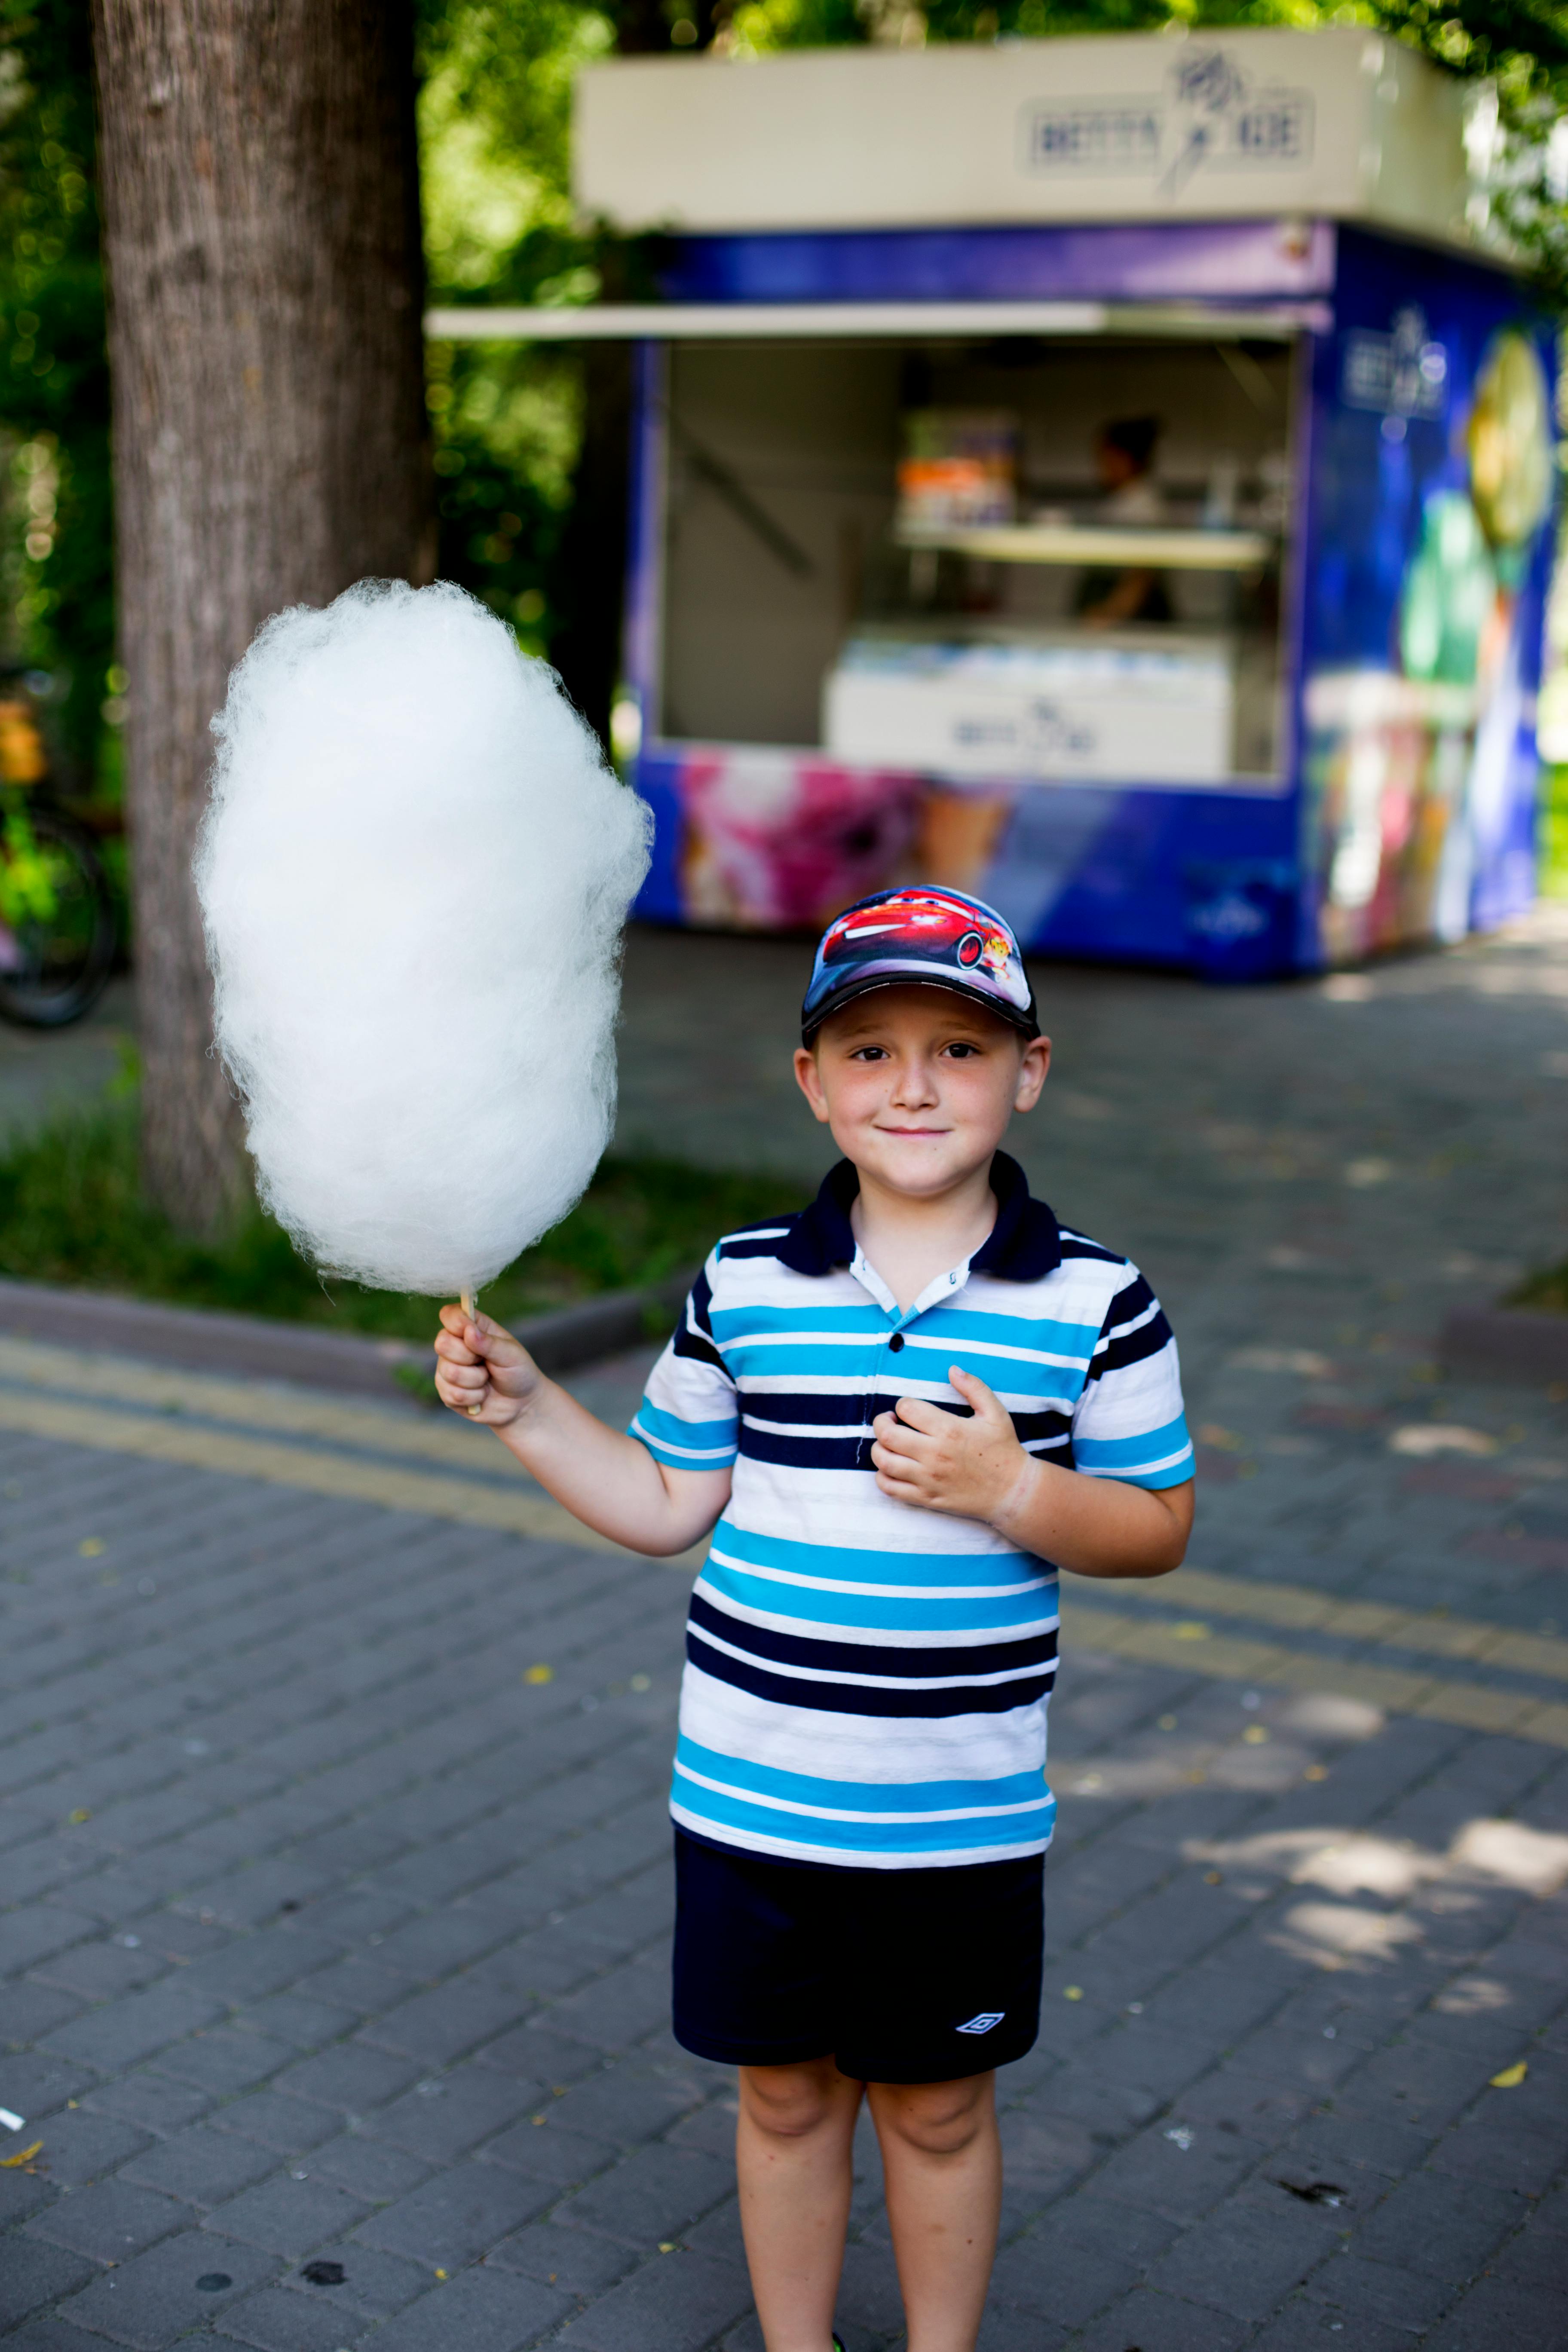 A boy posing with cotton candy | Source: Pexels